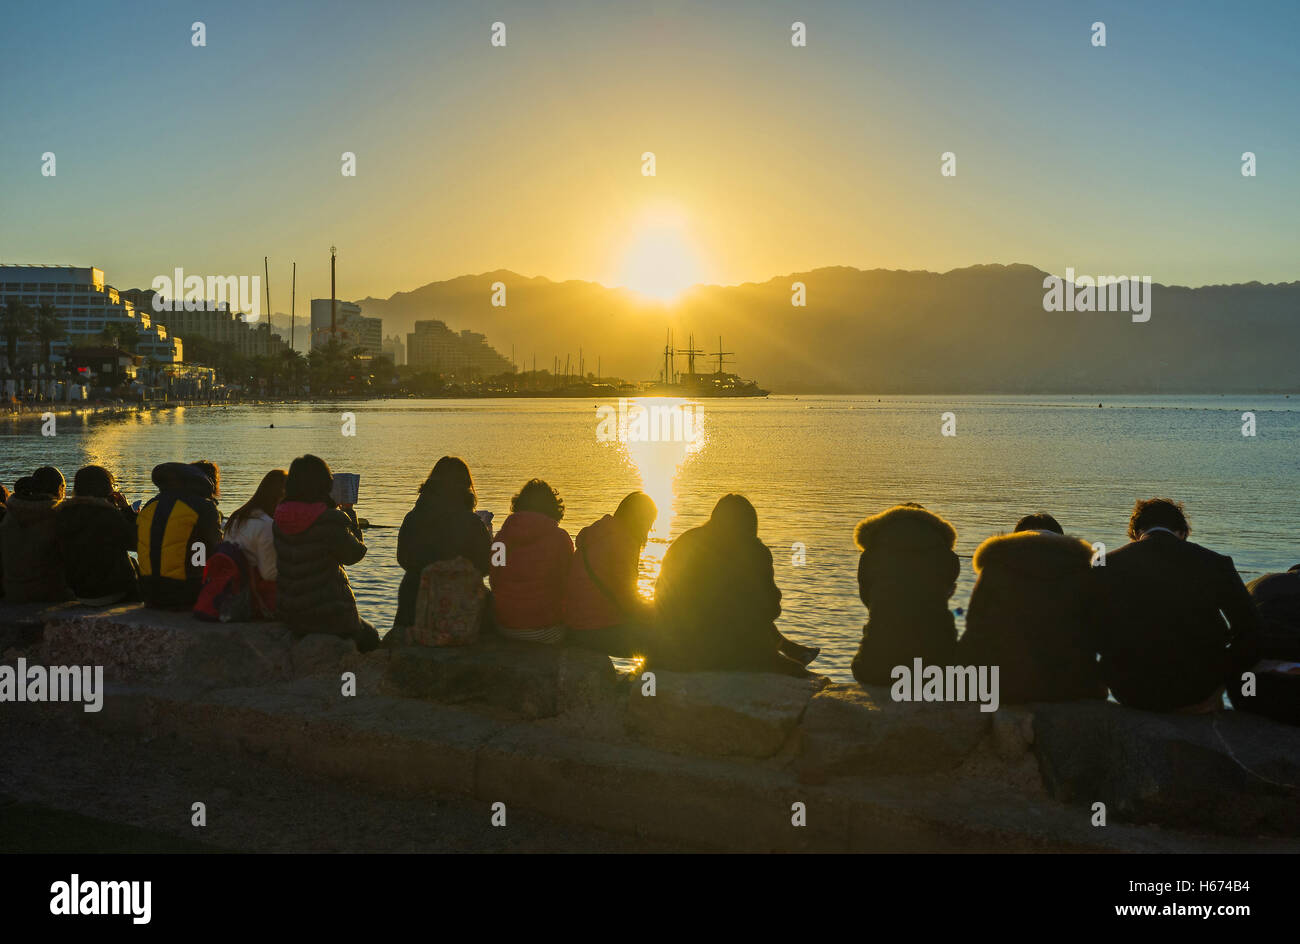 The beautiful sunrise over the North beach with the group of religious tourists, reading the Bible on the shore, Eilat, Israel. Stock Photo